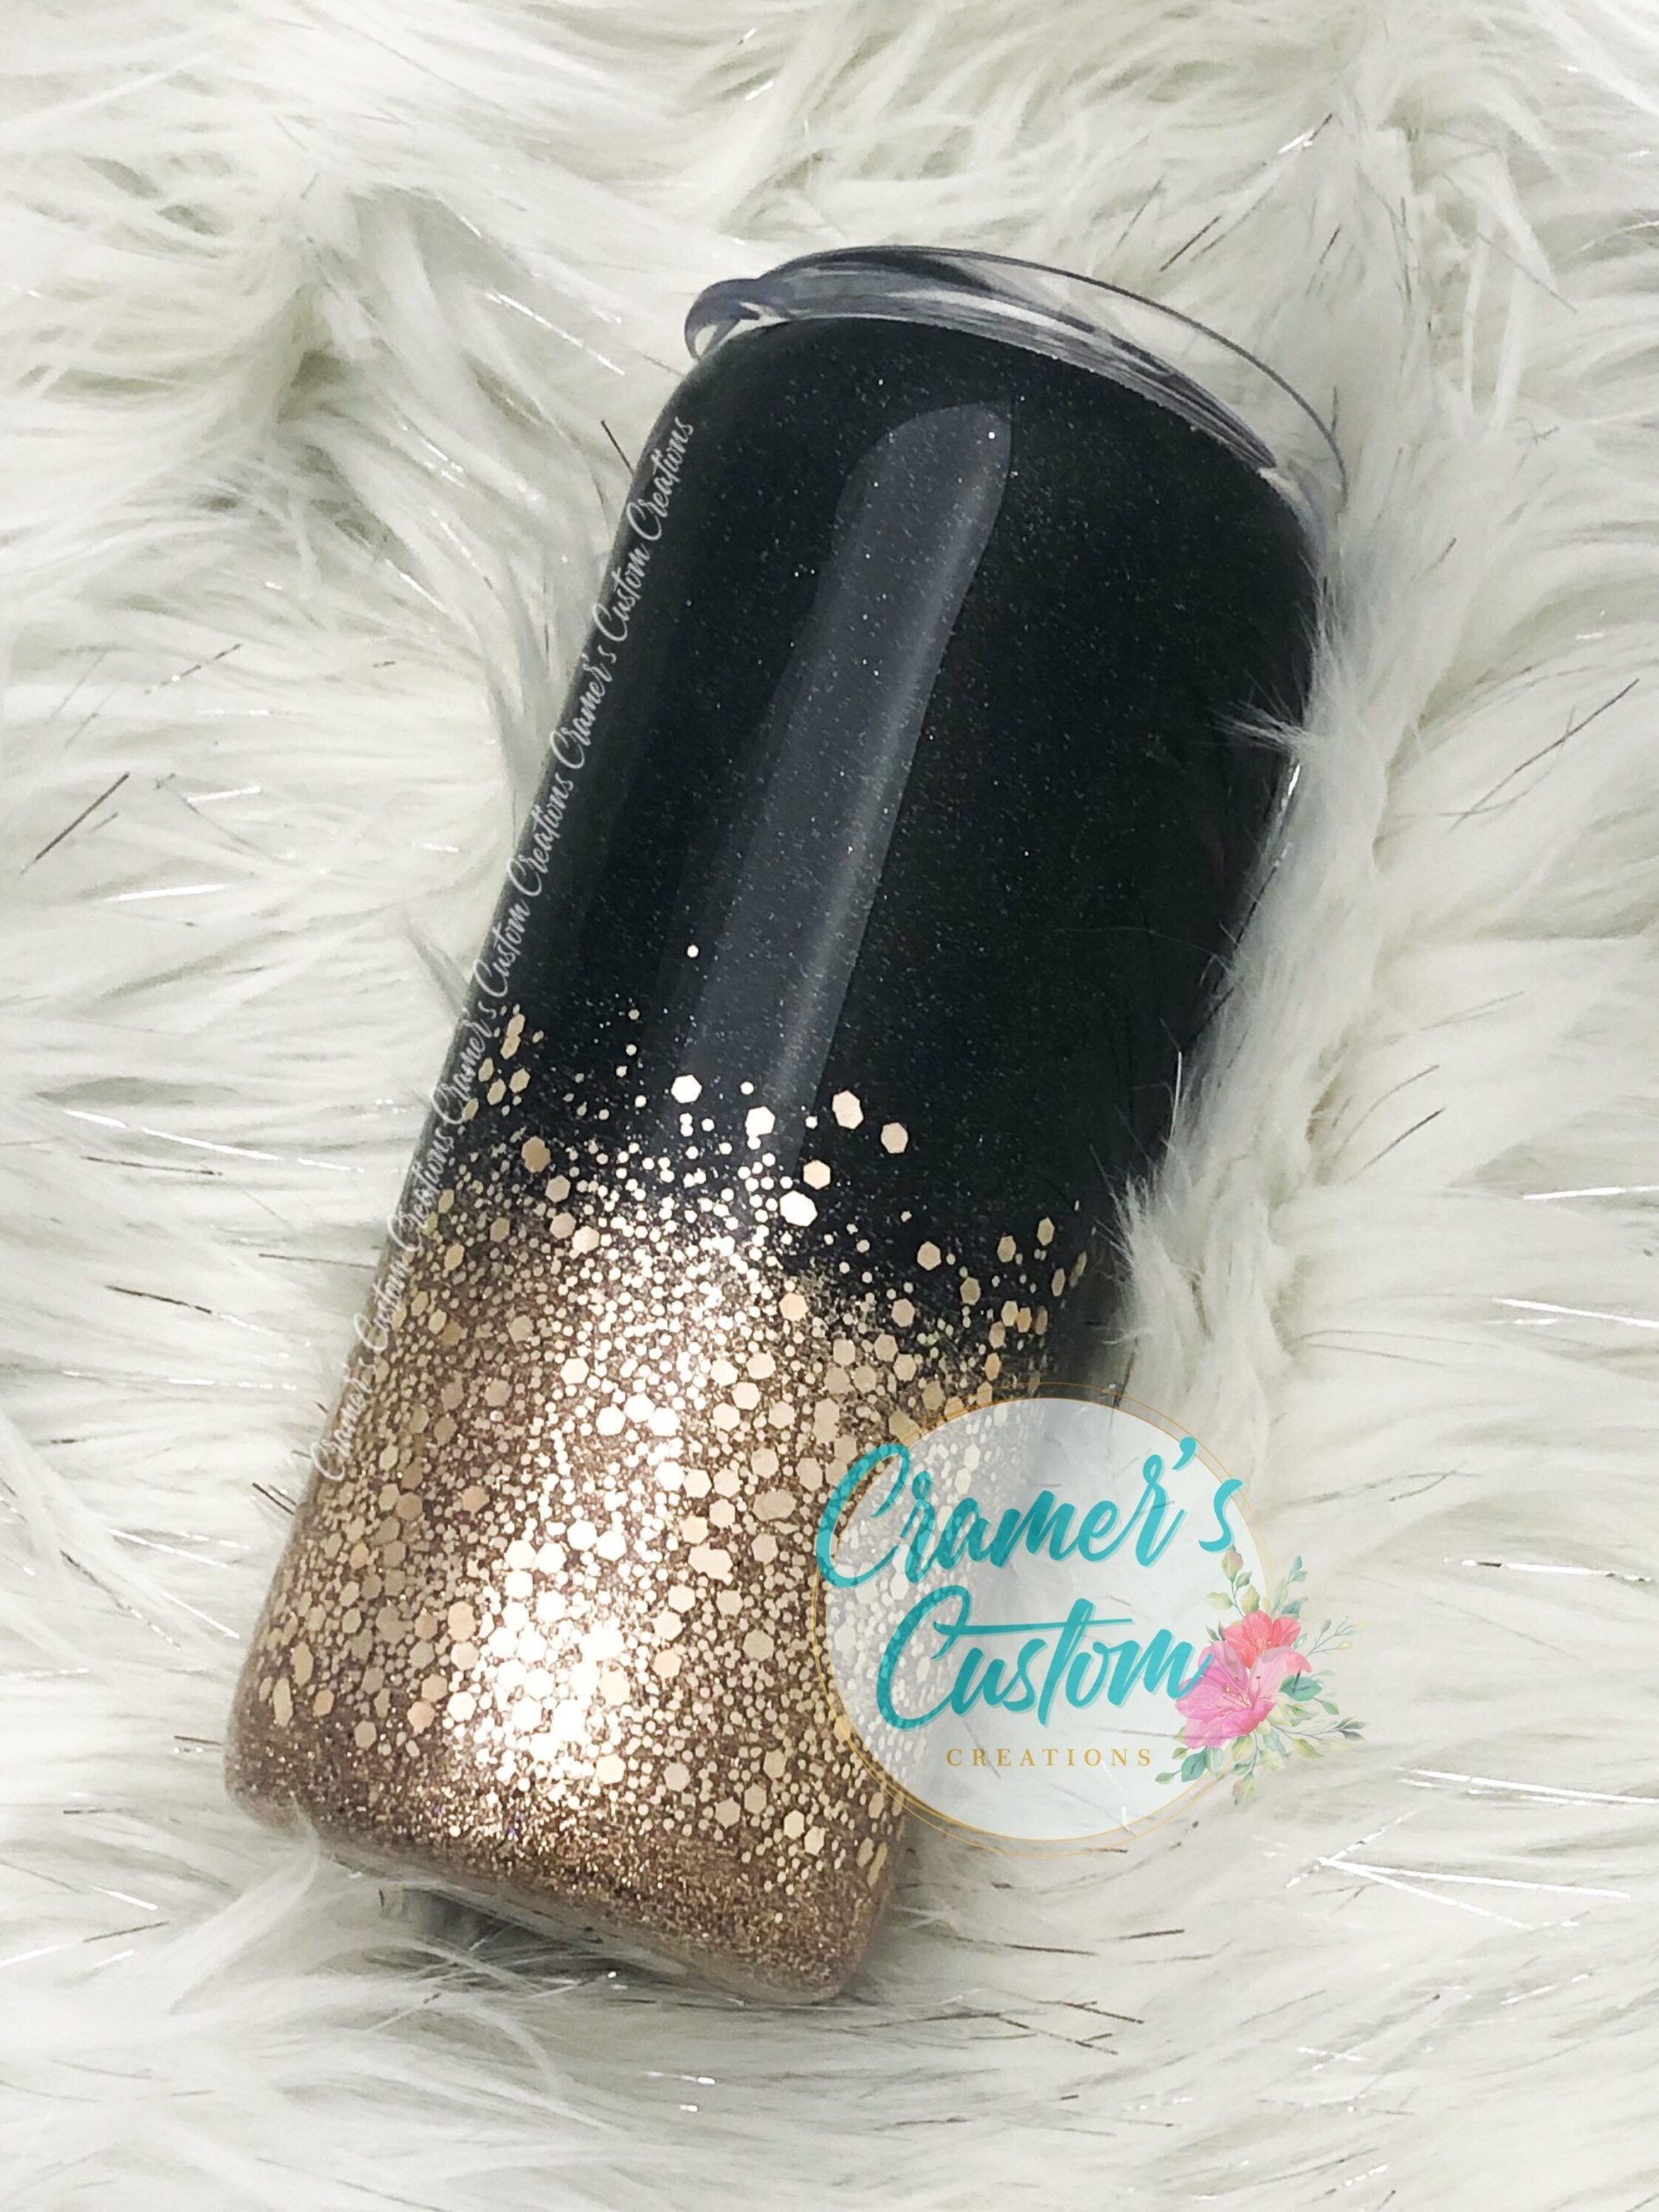 http://cramerscustomcreations.com/cdn/shop/products/custom-two-color-ombre-glitter-dipped-stainless-steel-tumbler-cup-5e05fb1b-scaled.jpg?v=1634238329